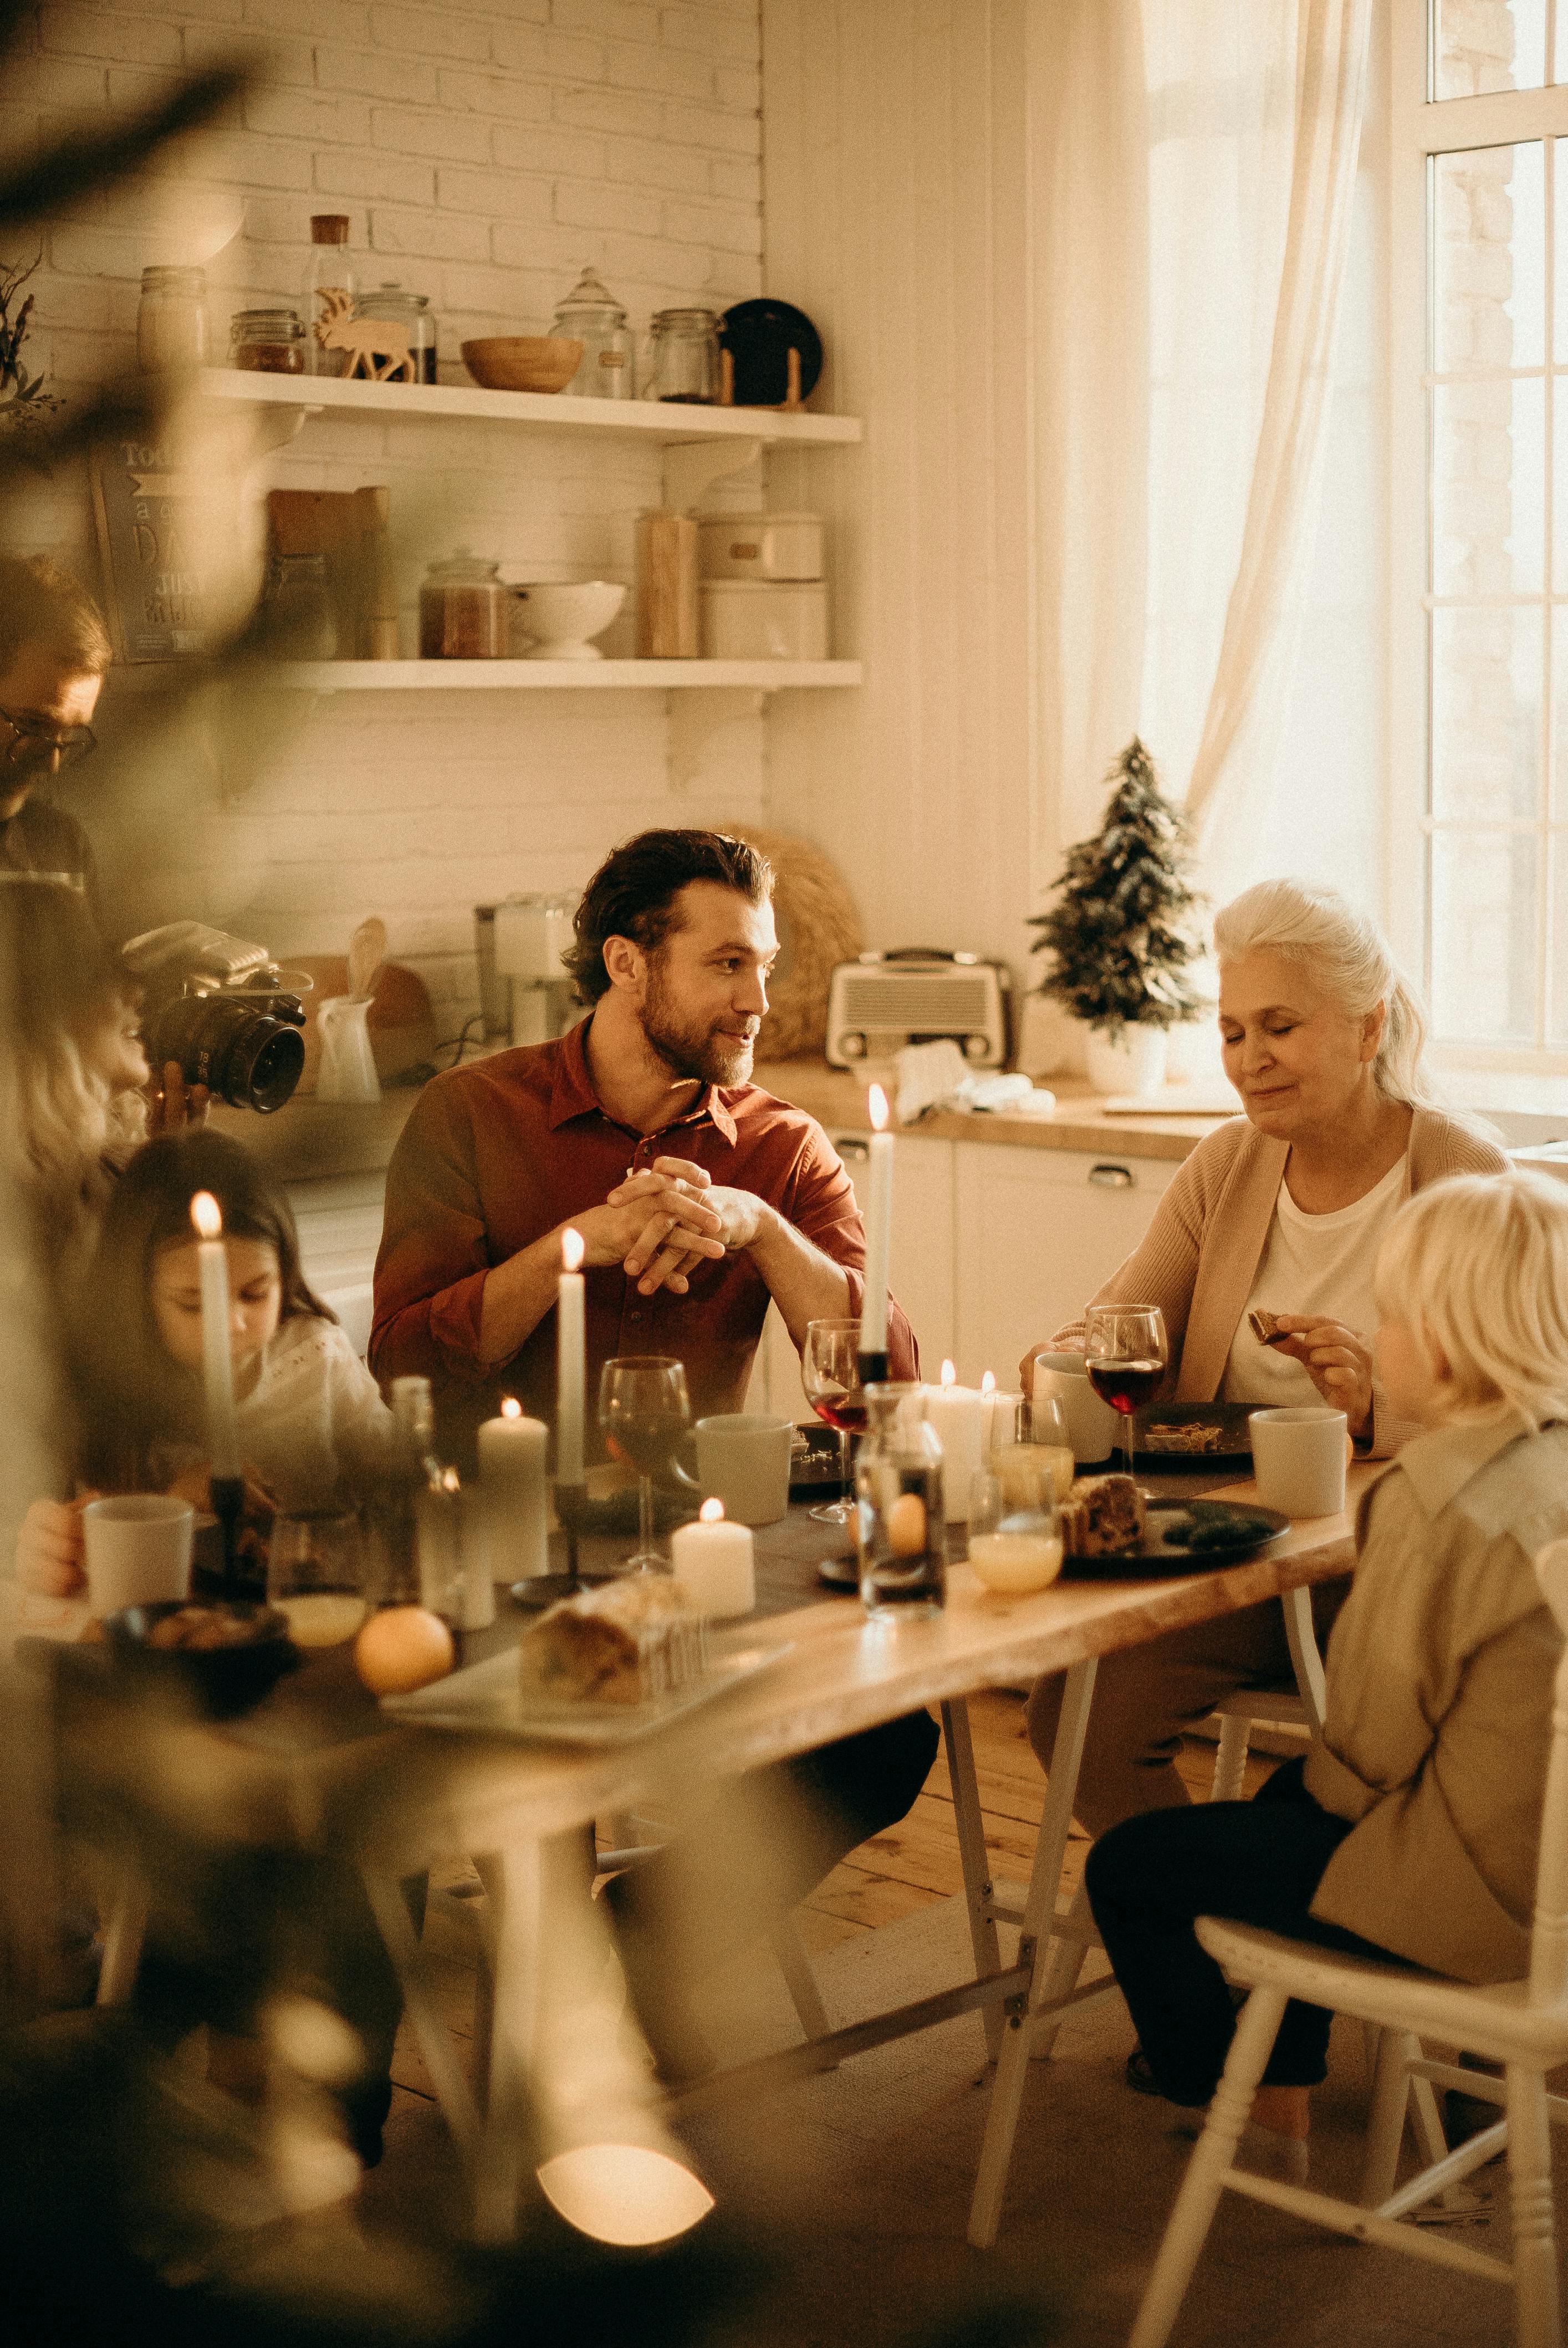 A family enjoying time together | Source: Pexels